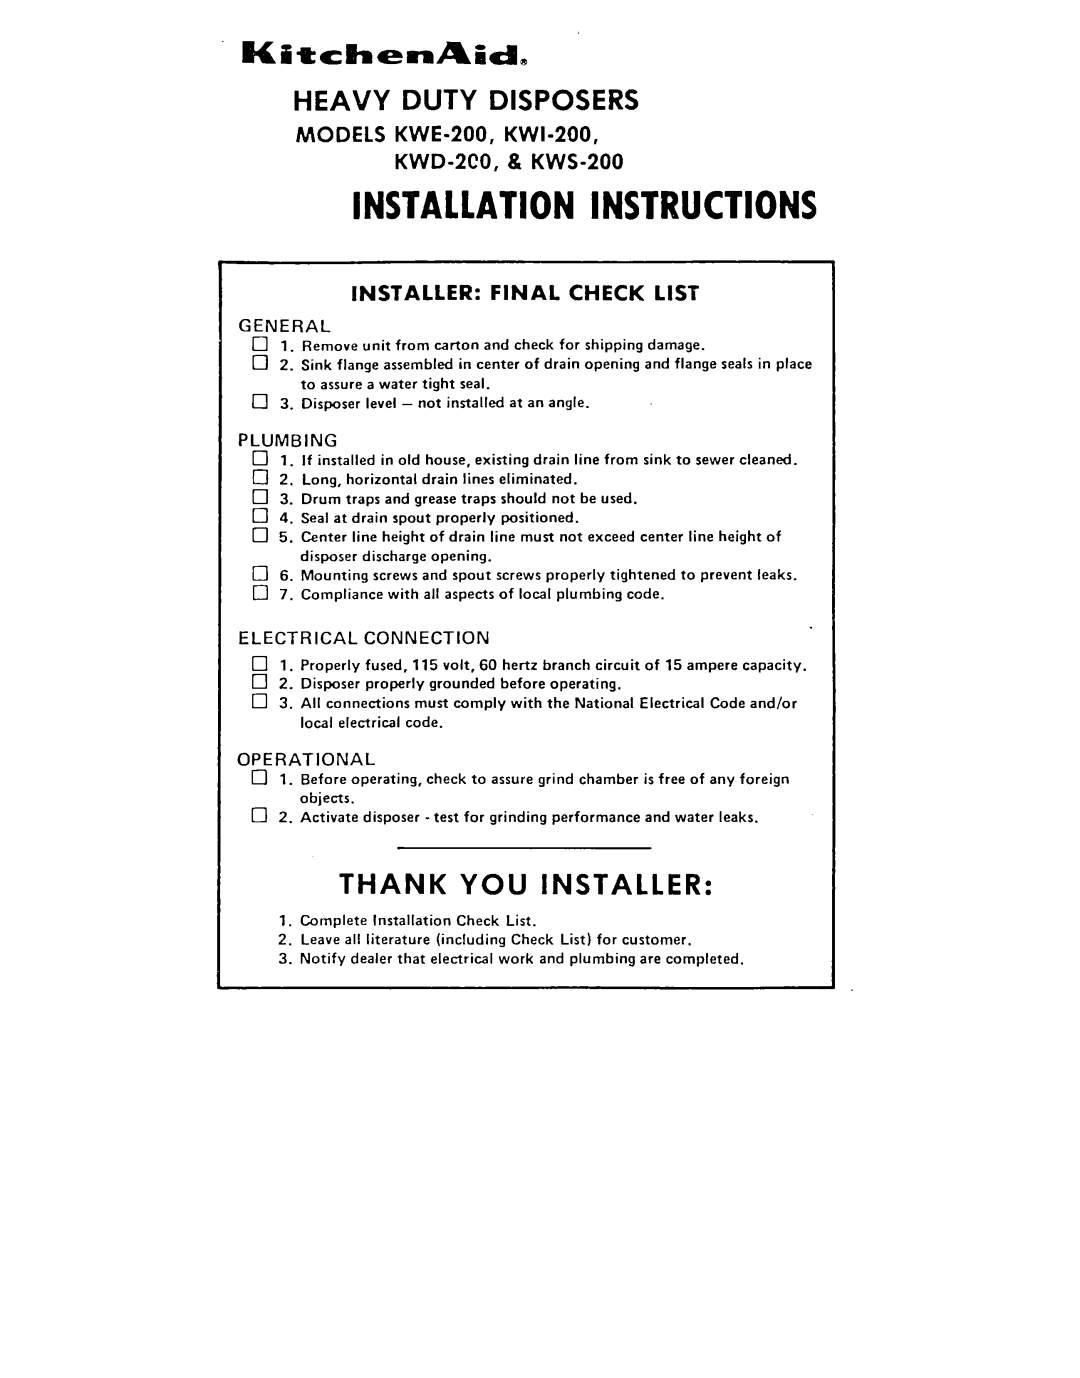 KitchenAid KWE-200 installation instructions General, Plumbing, Electrical Connection, Operational, Heavy Duty Disposers 